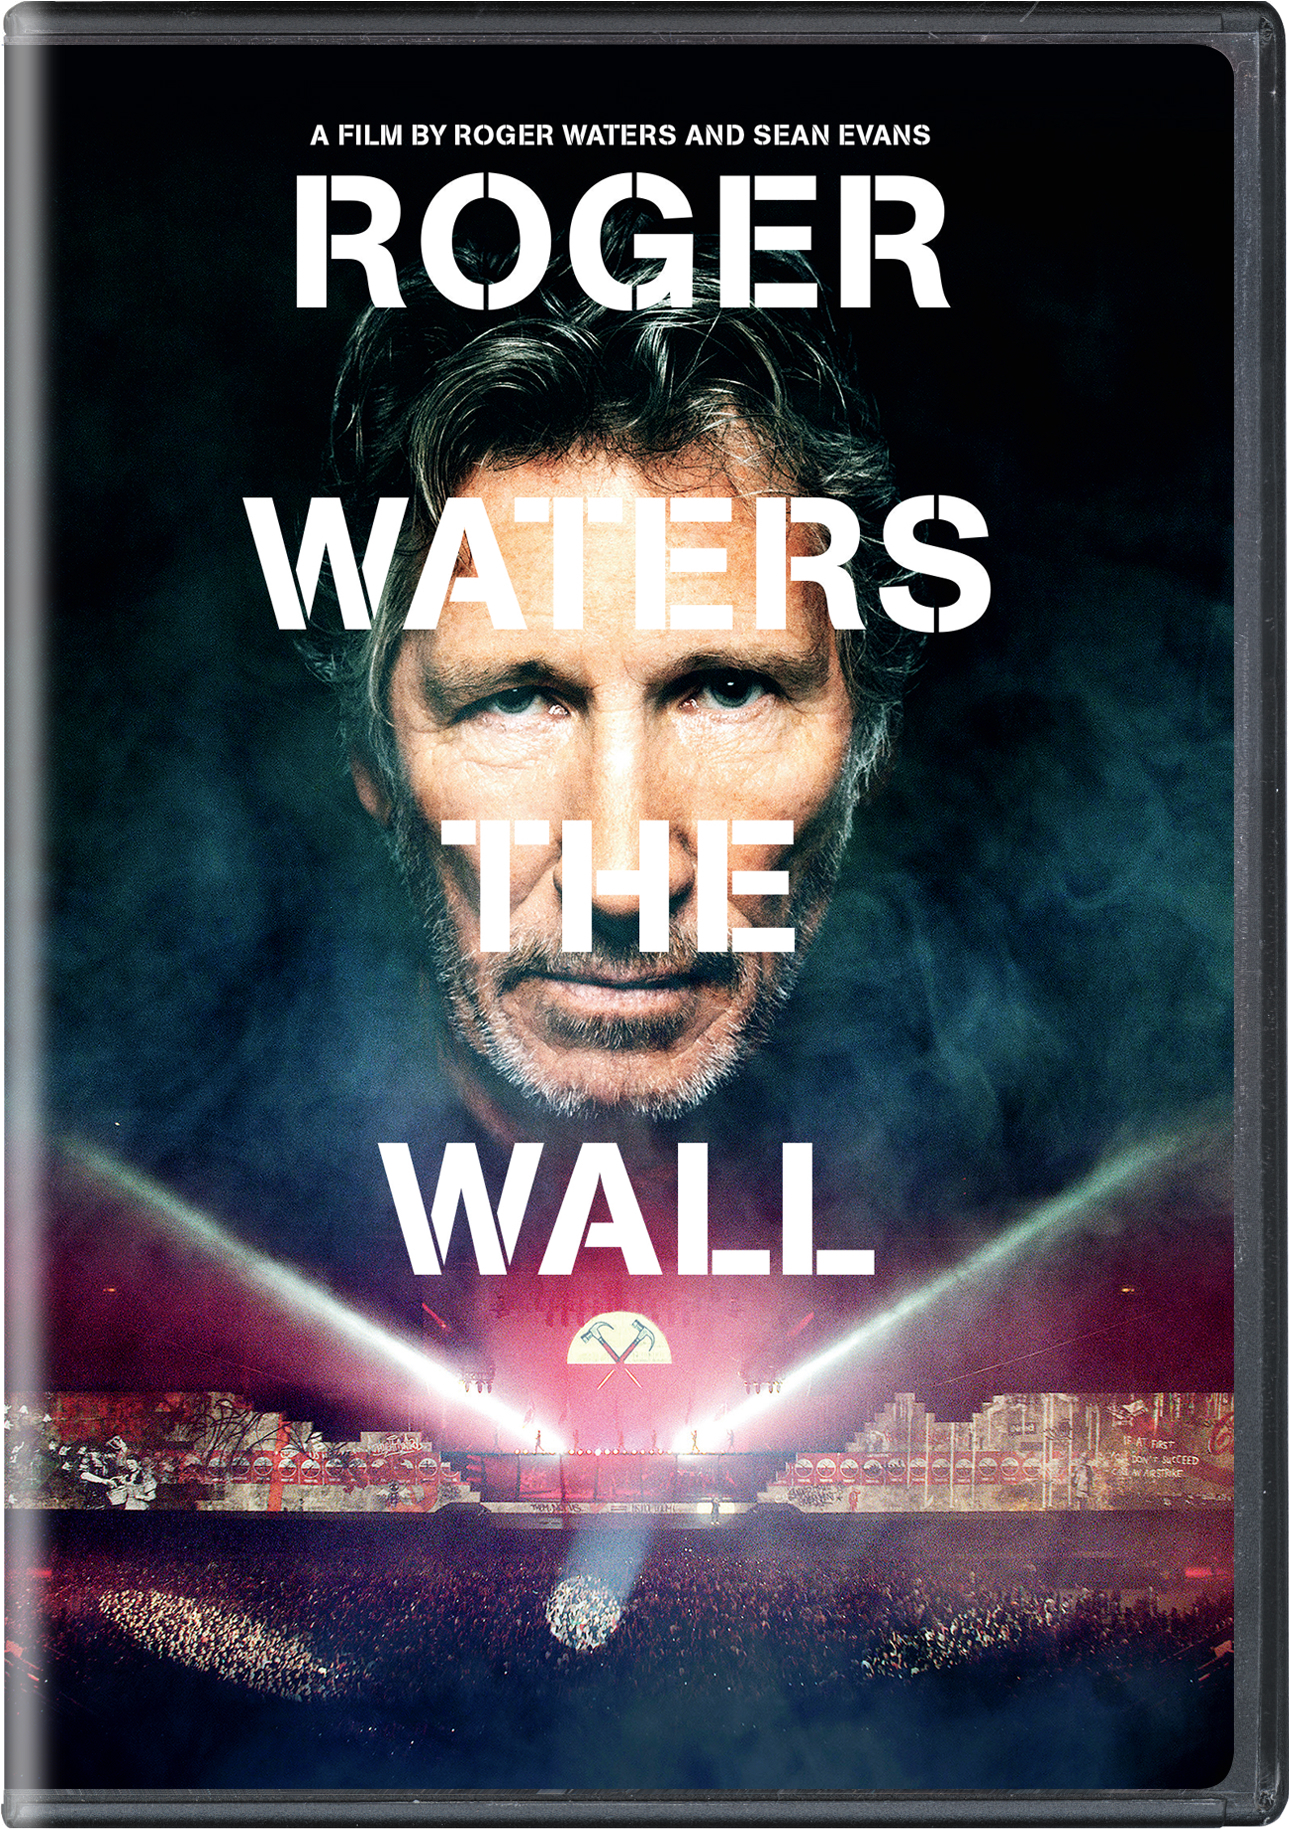 Roger Waters: The Wall - DVD [ 2014 ]  - Documentaries On DVD